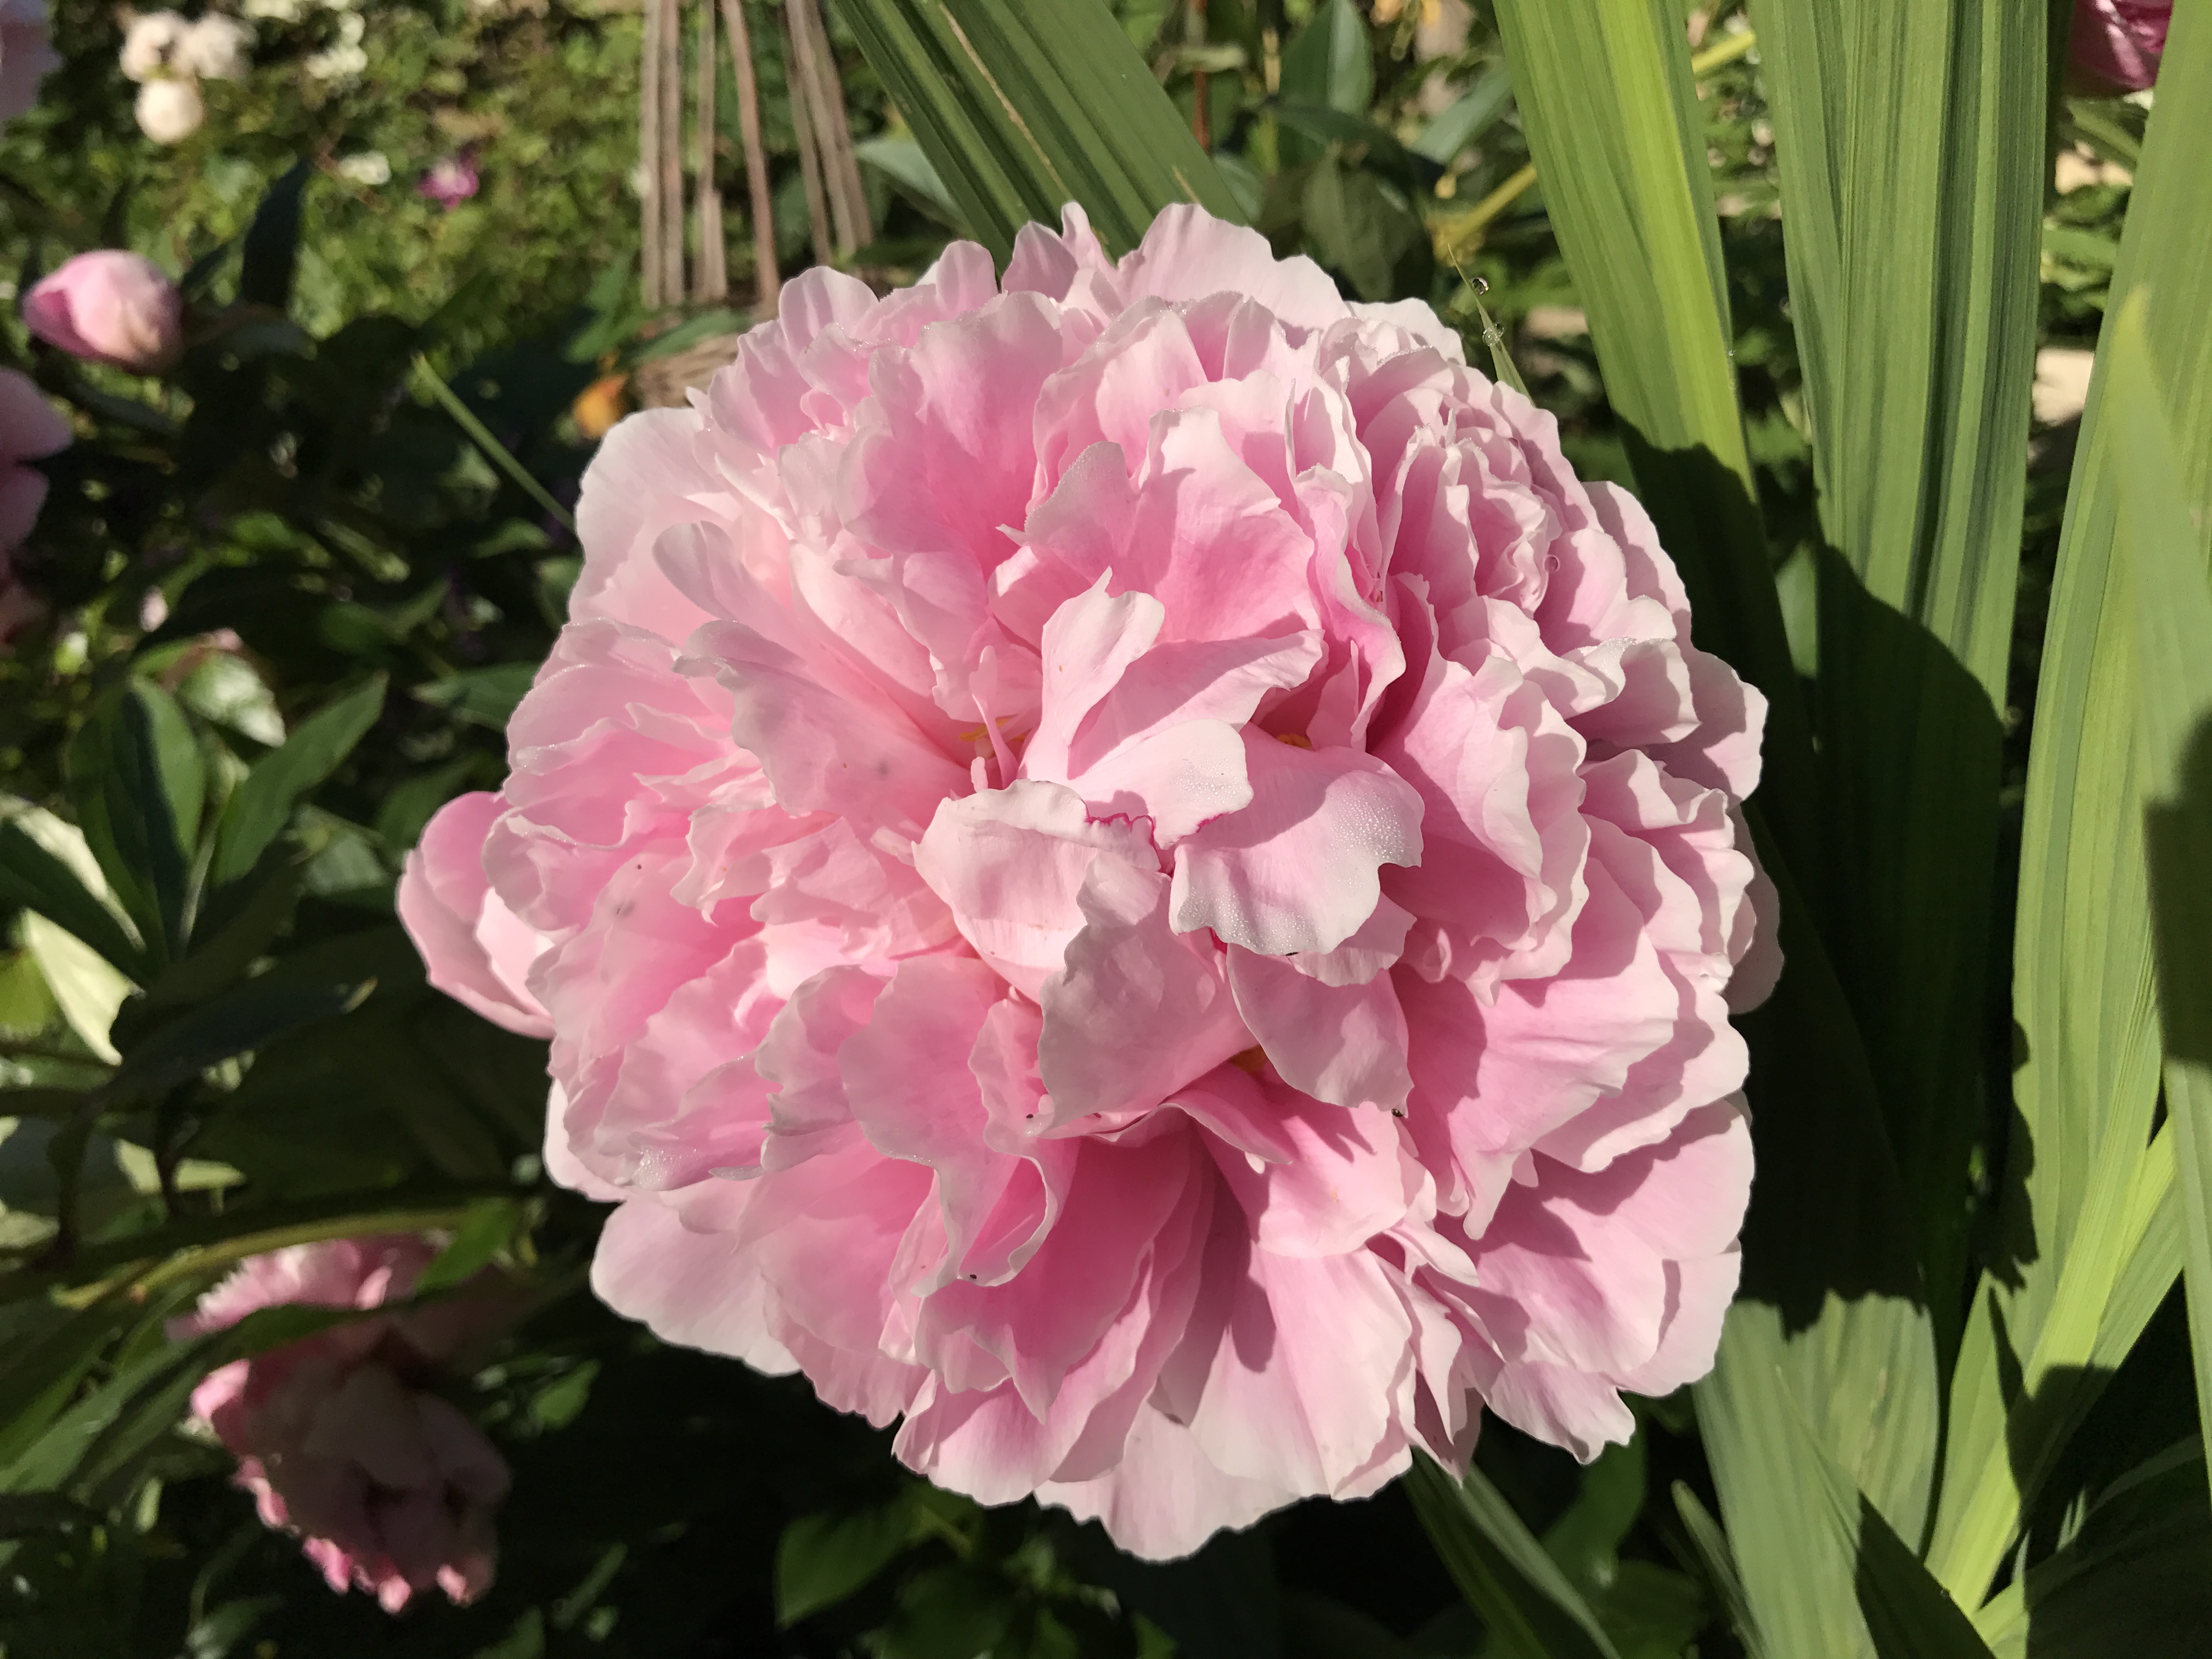 Peonies may suffer in extreme weather. (Hannah Stephenson/PA)